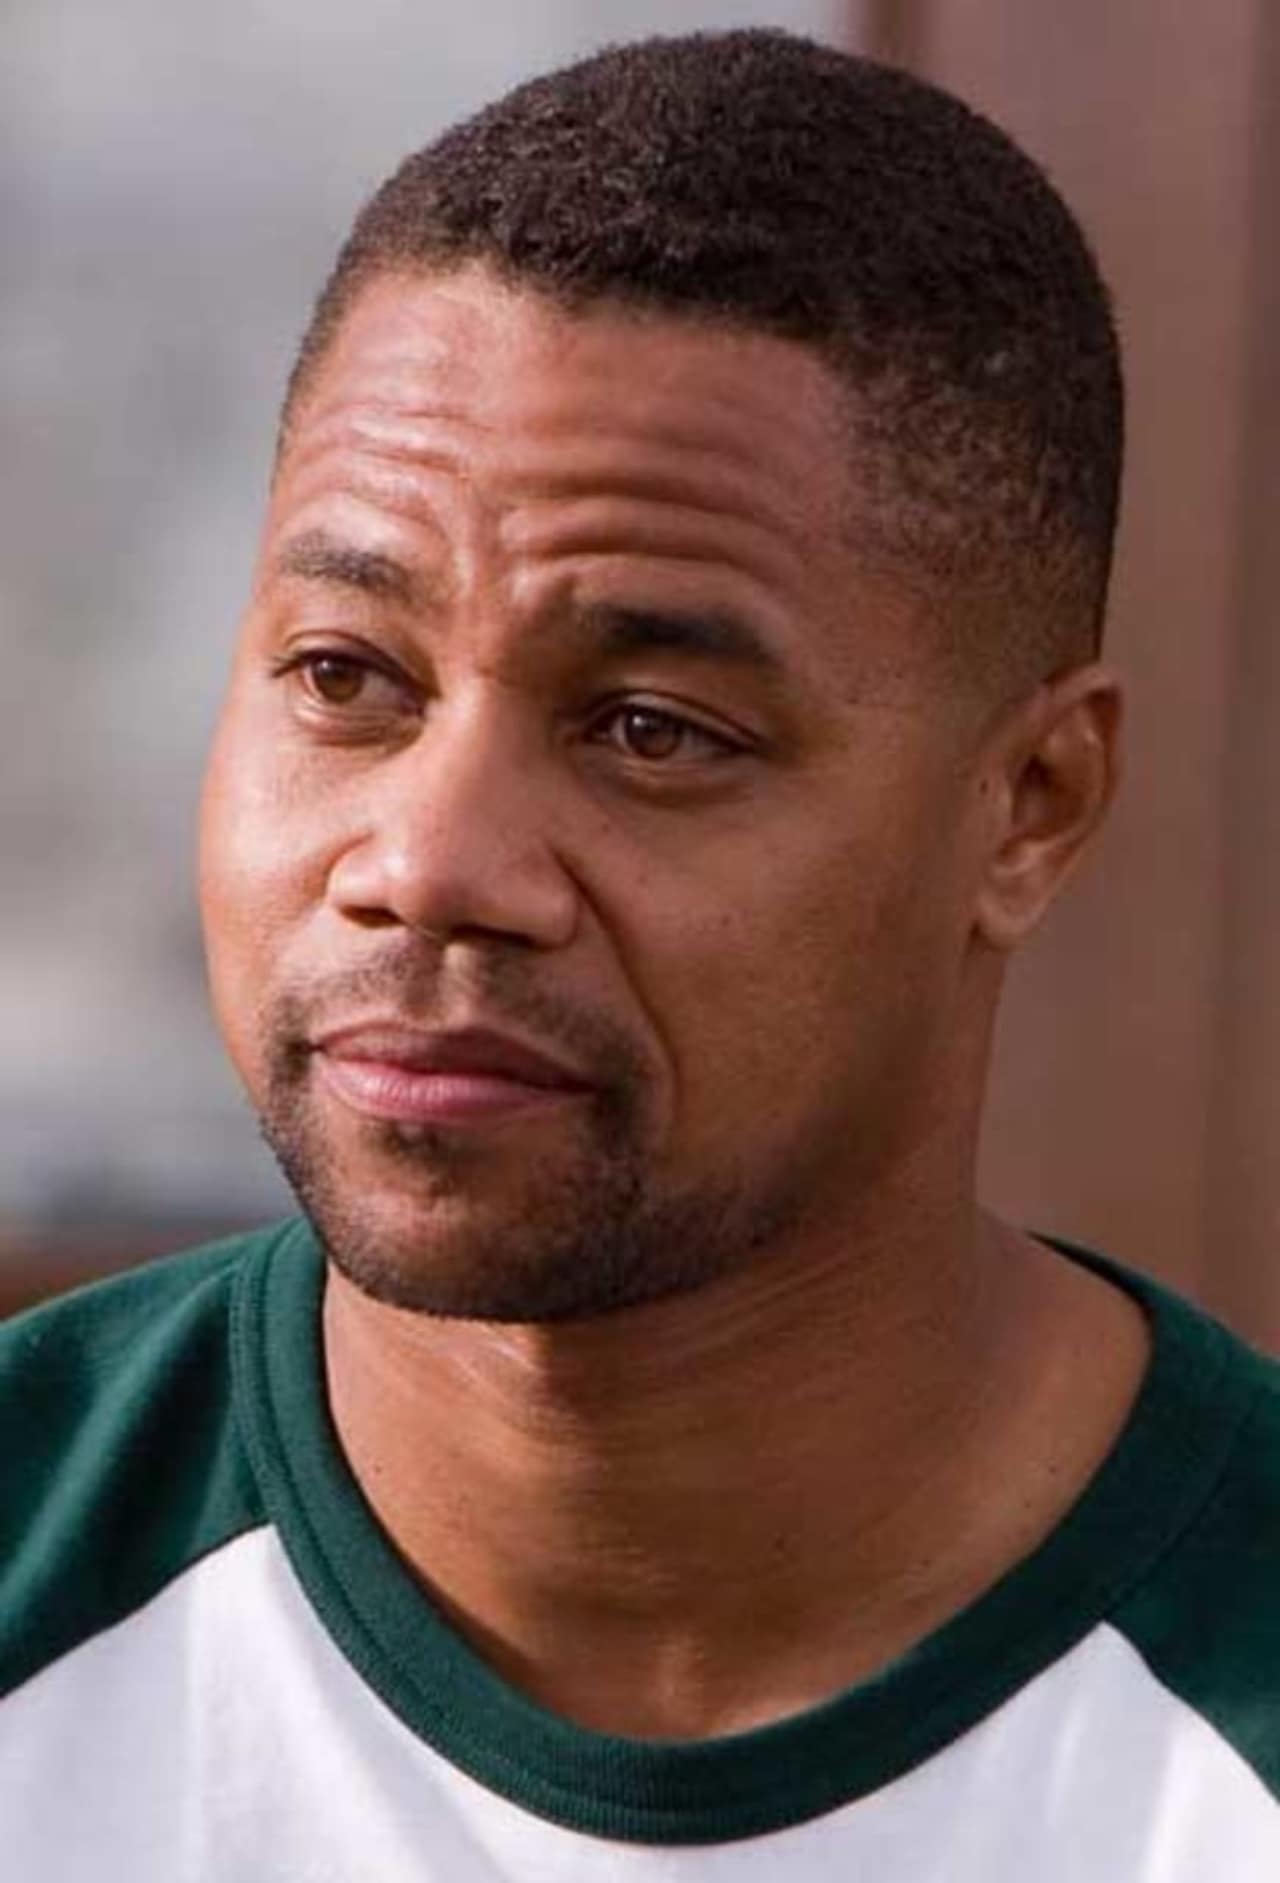 Cuba Gooding, Jr. will be featured on "Inside The Actors Studio," which films at Pace University's Manhattan Campus.